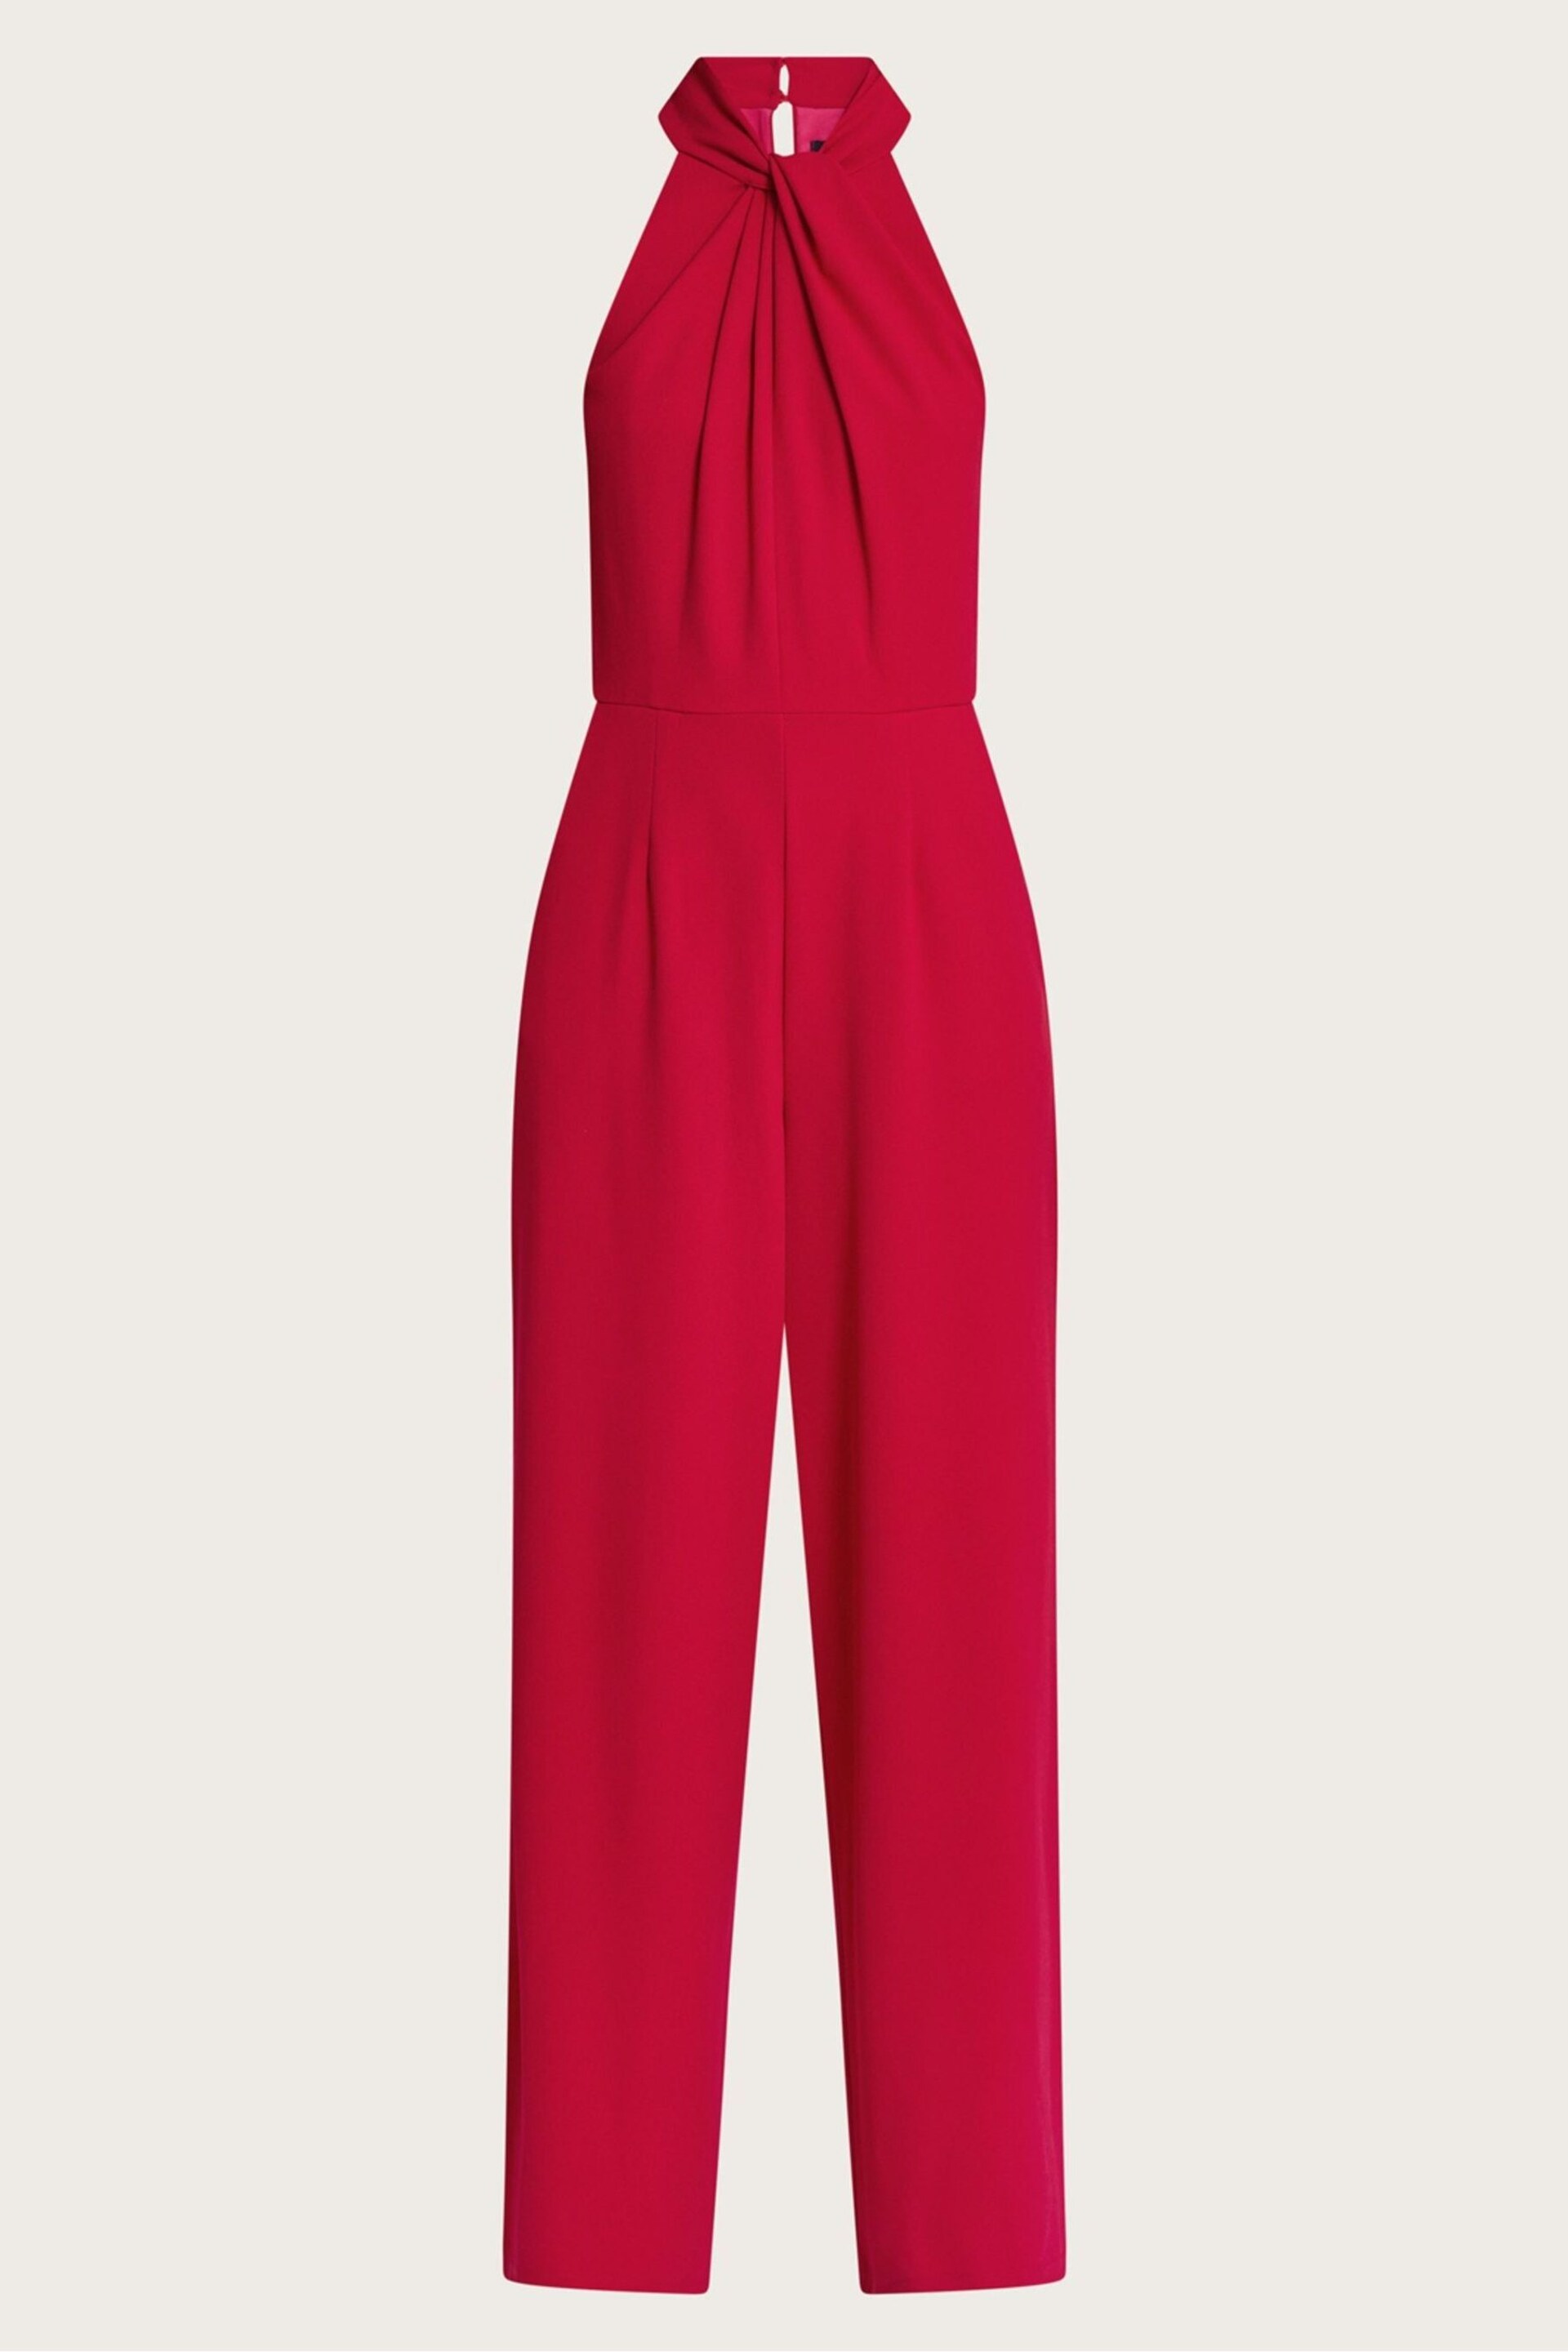 Monsoon Red Cam Cross-Over Jumpsuit - Image 5 of 5